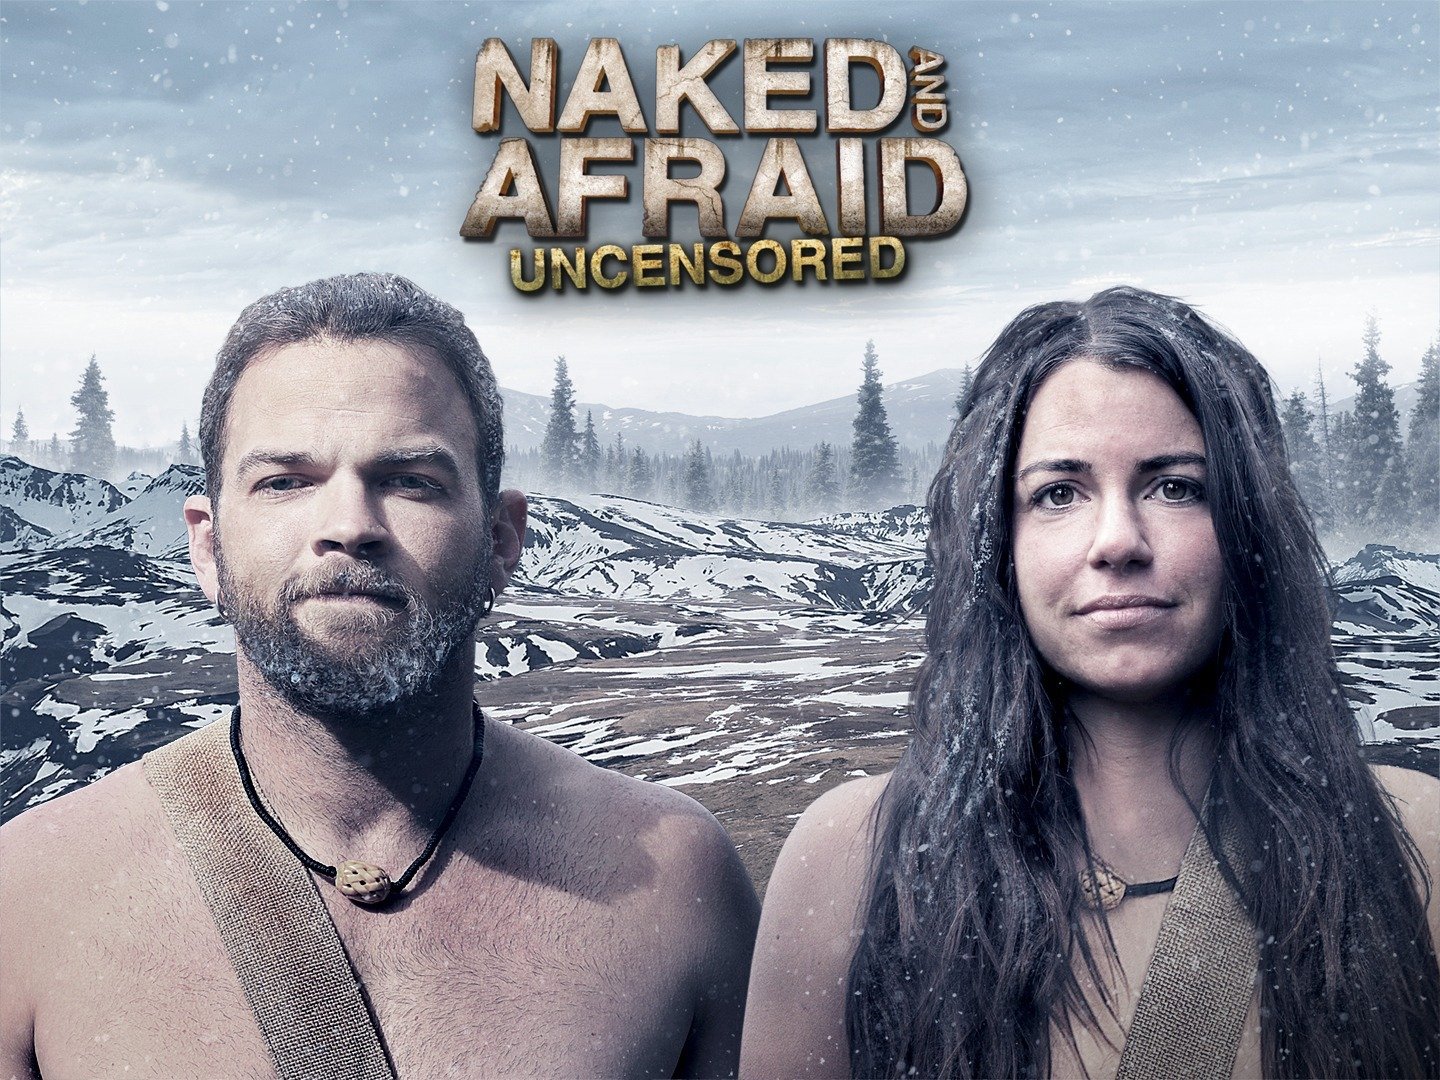 Naked and unfraid uncensored